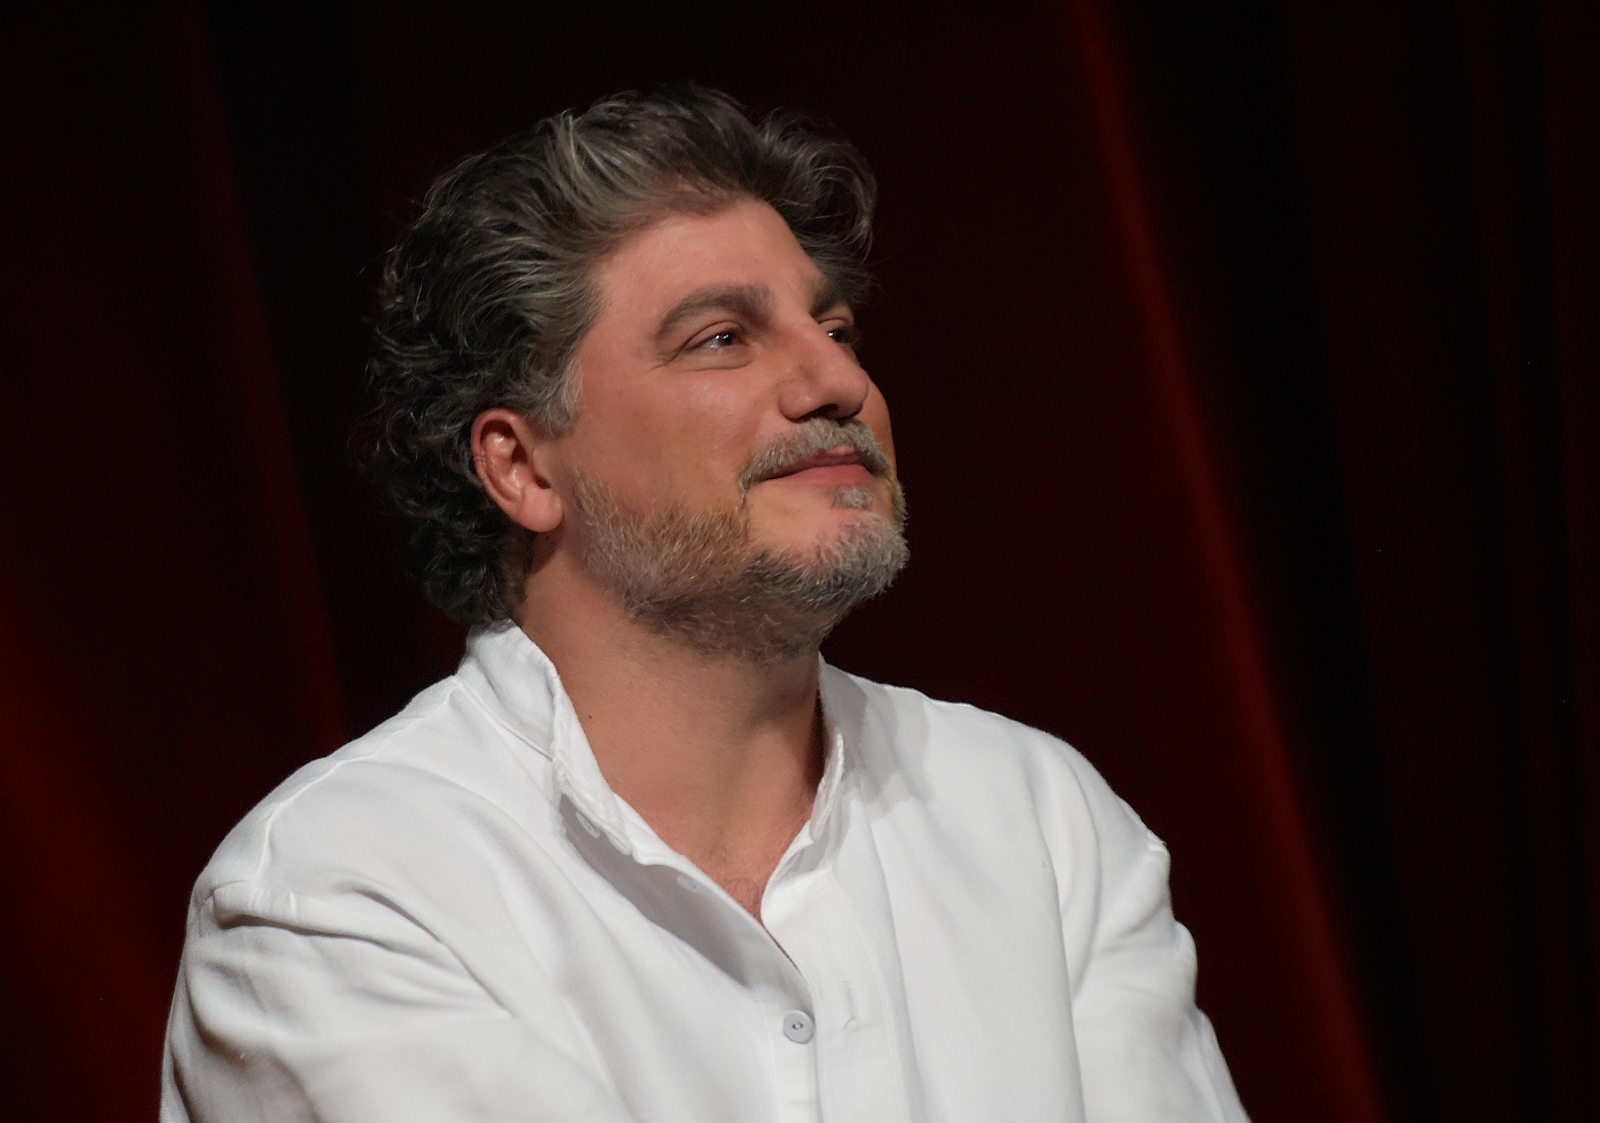 Jos Cura during the curtain call after Otello in Zurich, 2011.